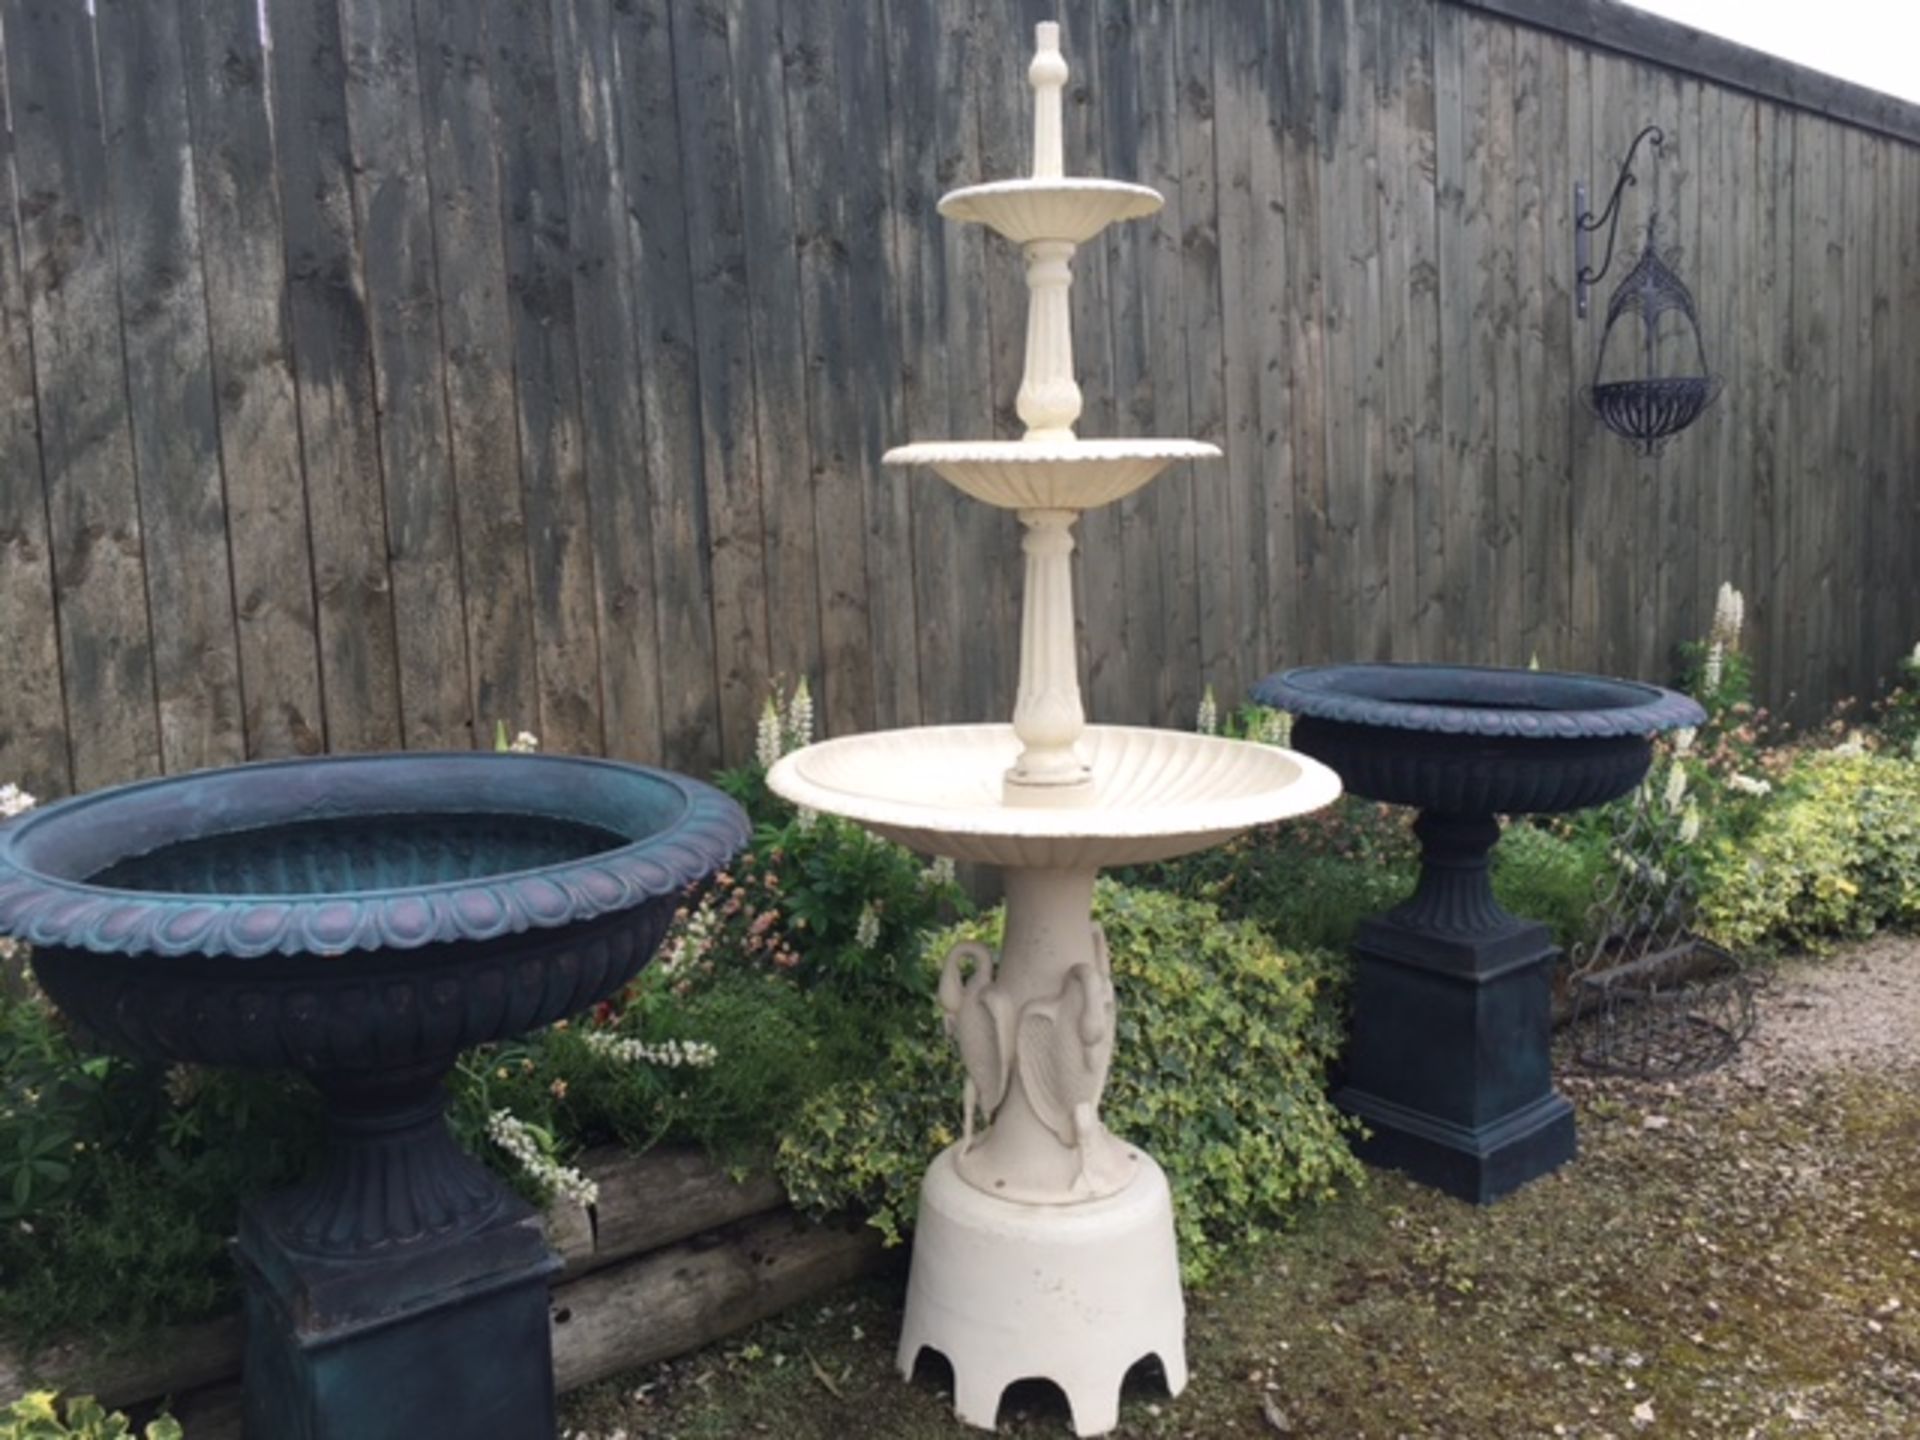 LARGE 3 TIER CAST IRON FOUNTAIN IN ANTIQUE WHITE